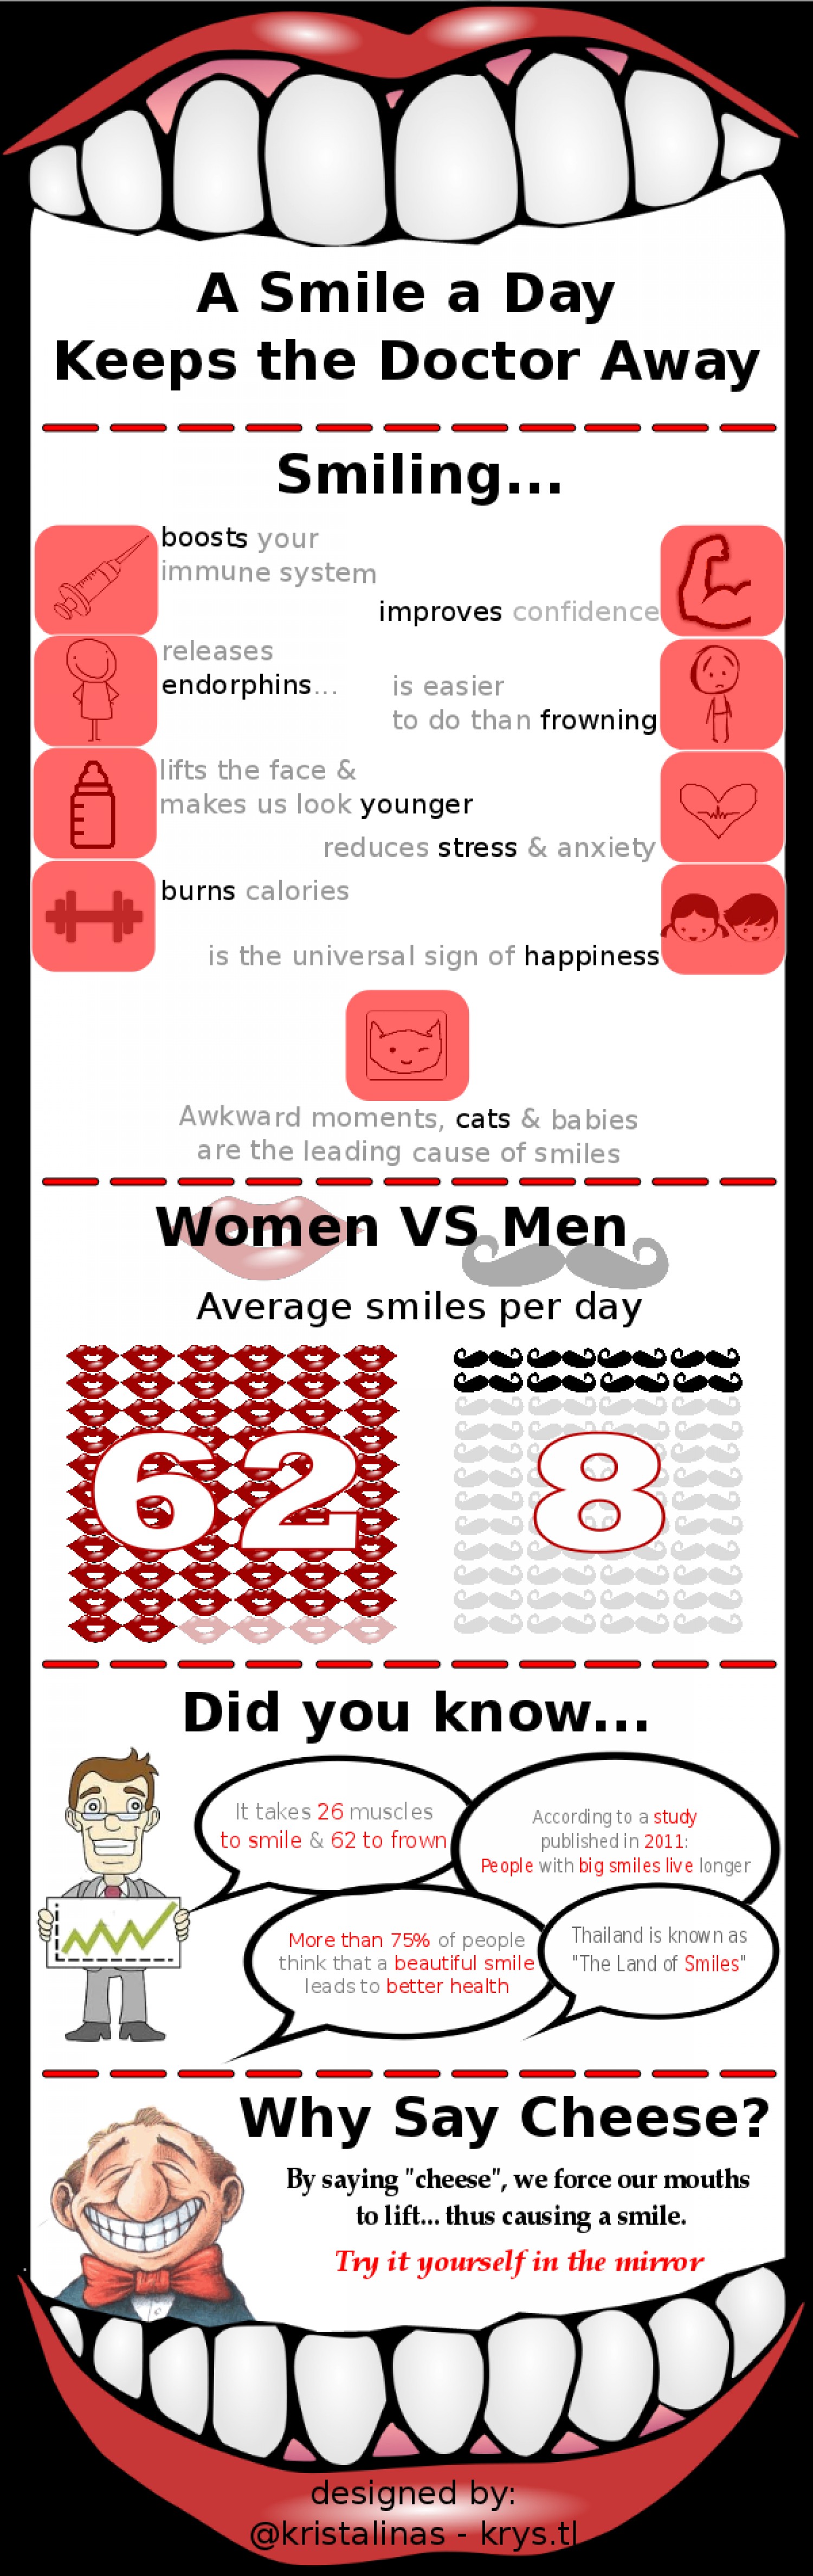 8 Ways Smiling Improves Your Health Infographic